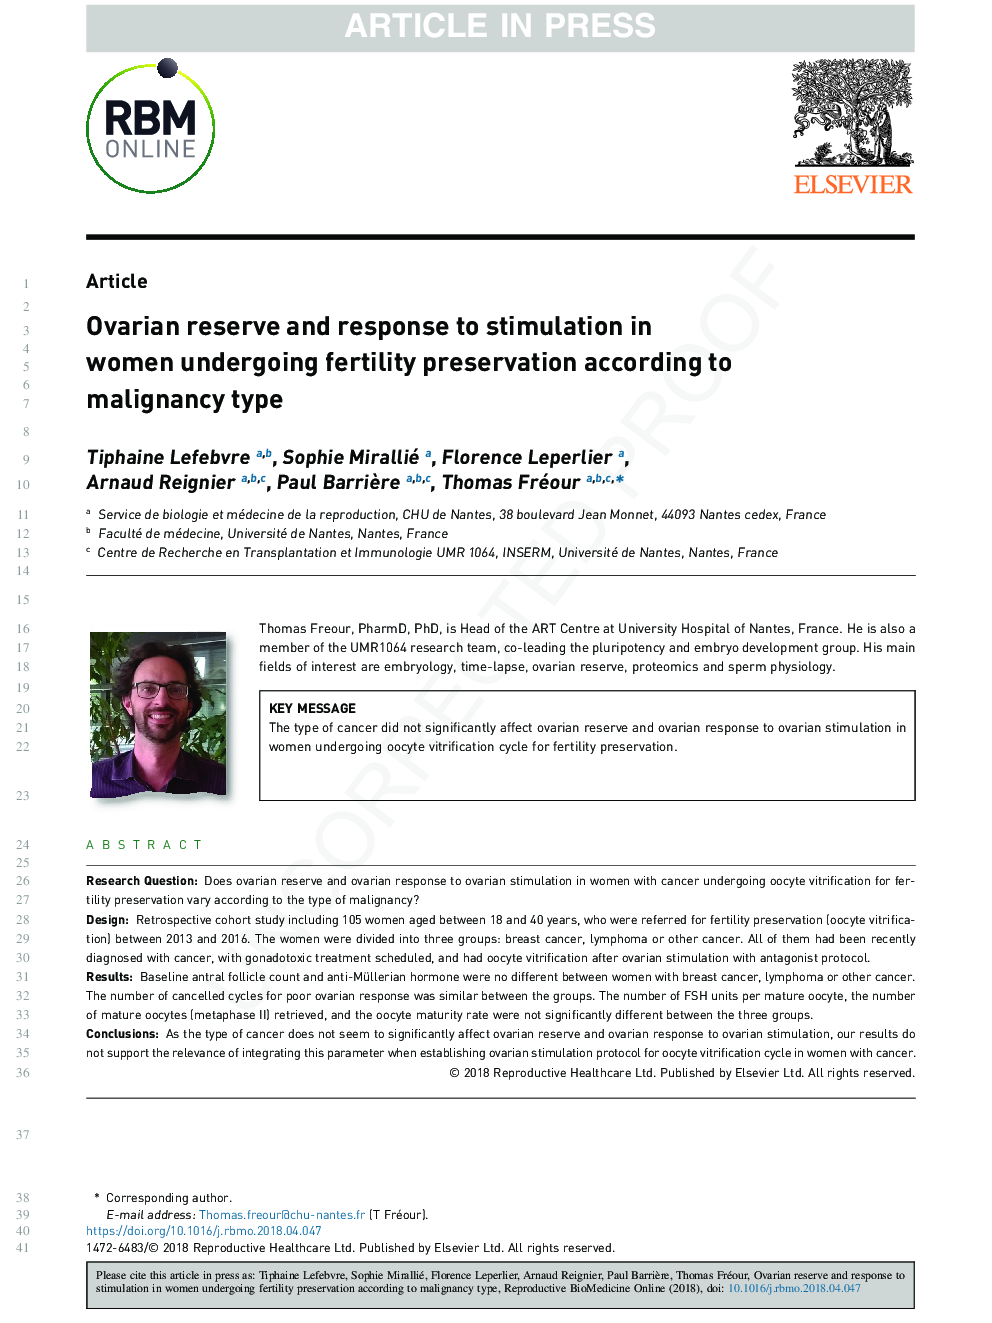 Ovarian reserve and response to stimulation in women undergoing fertility preservation according to malignancy type